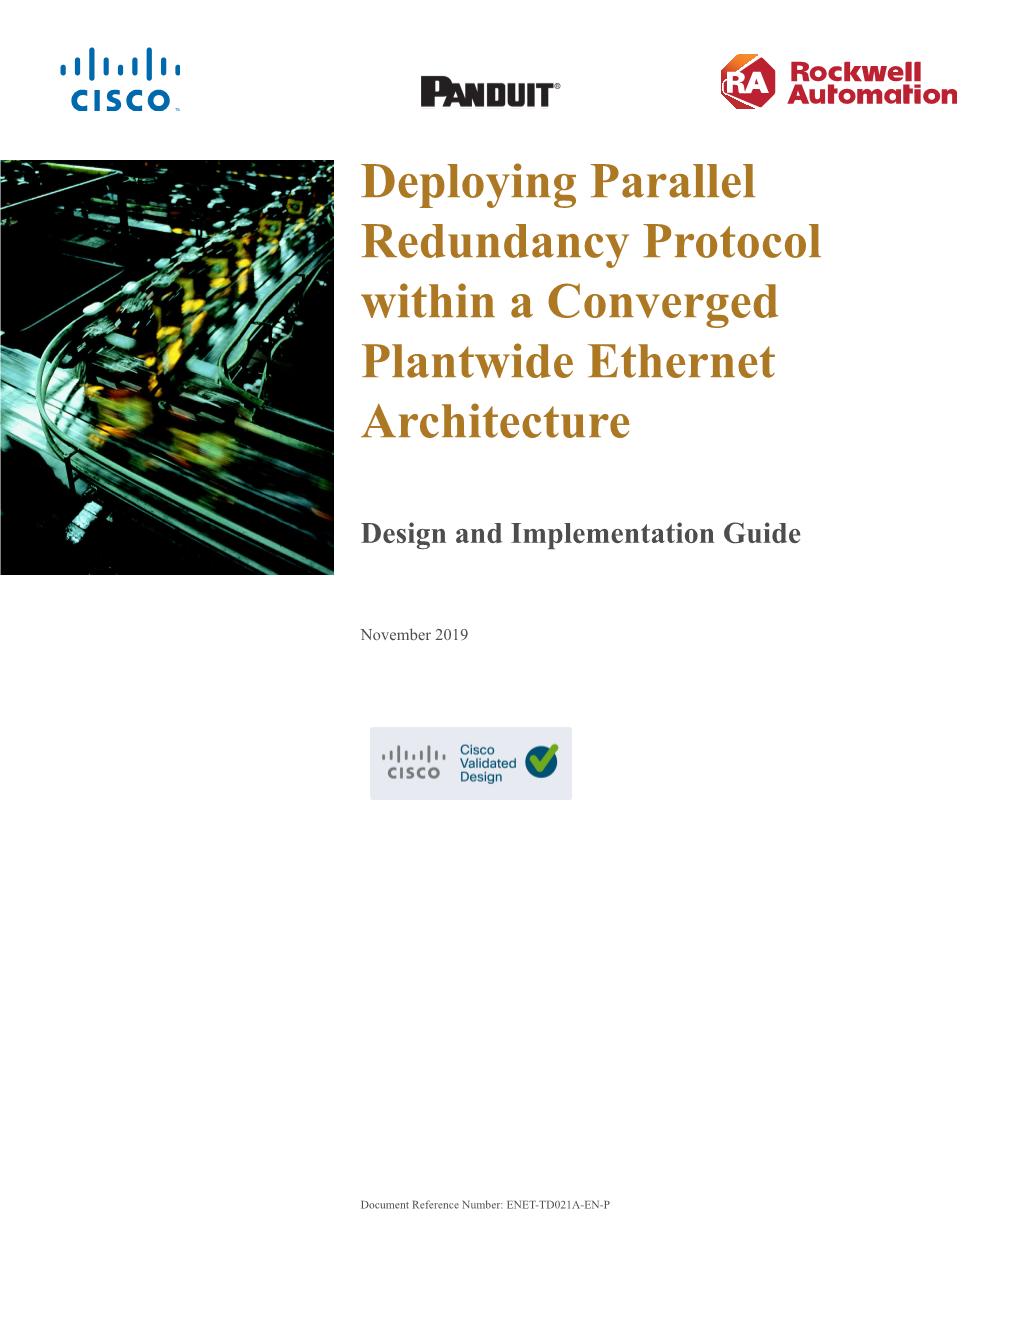 Deploying Parallel Redundancy Protocol Within a Converged Plantwide Ethernet Architecture